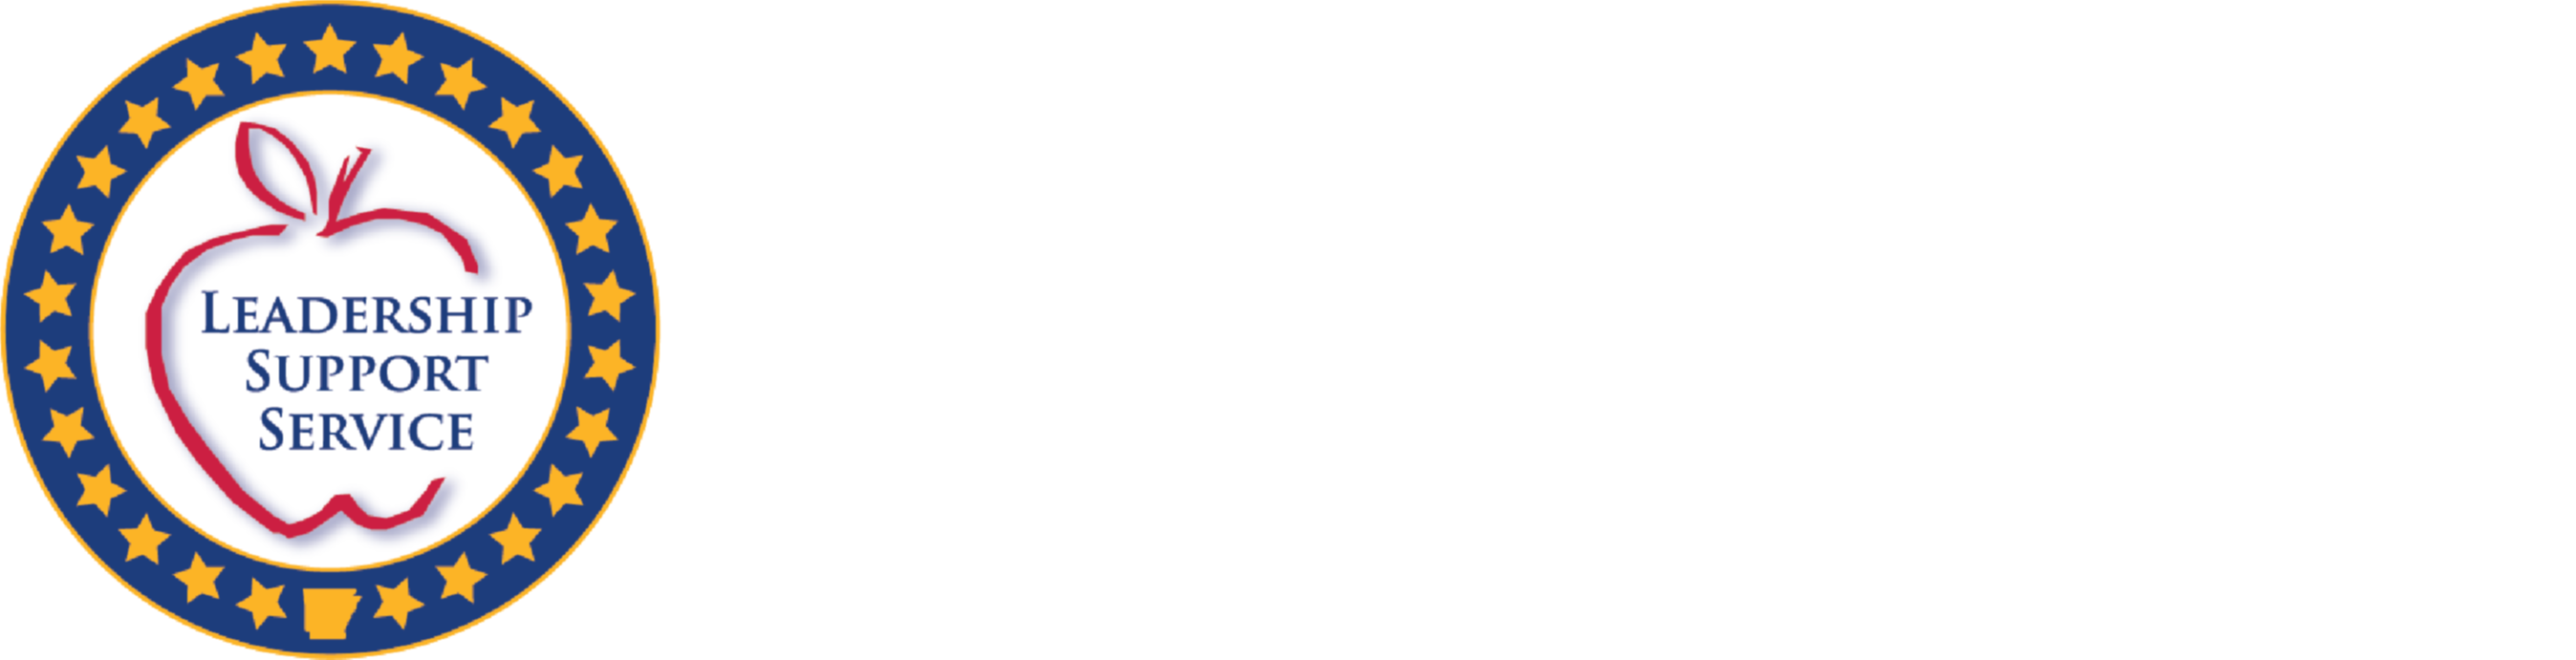 Division of Elementary and Secondary Education State Require Information